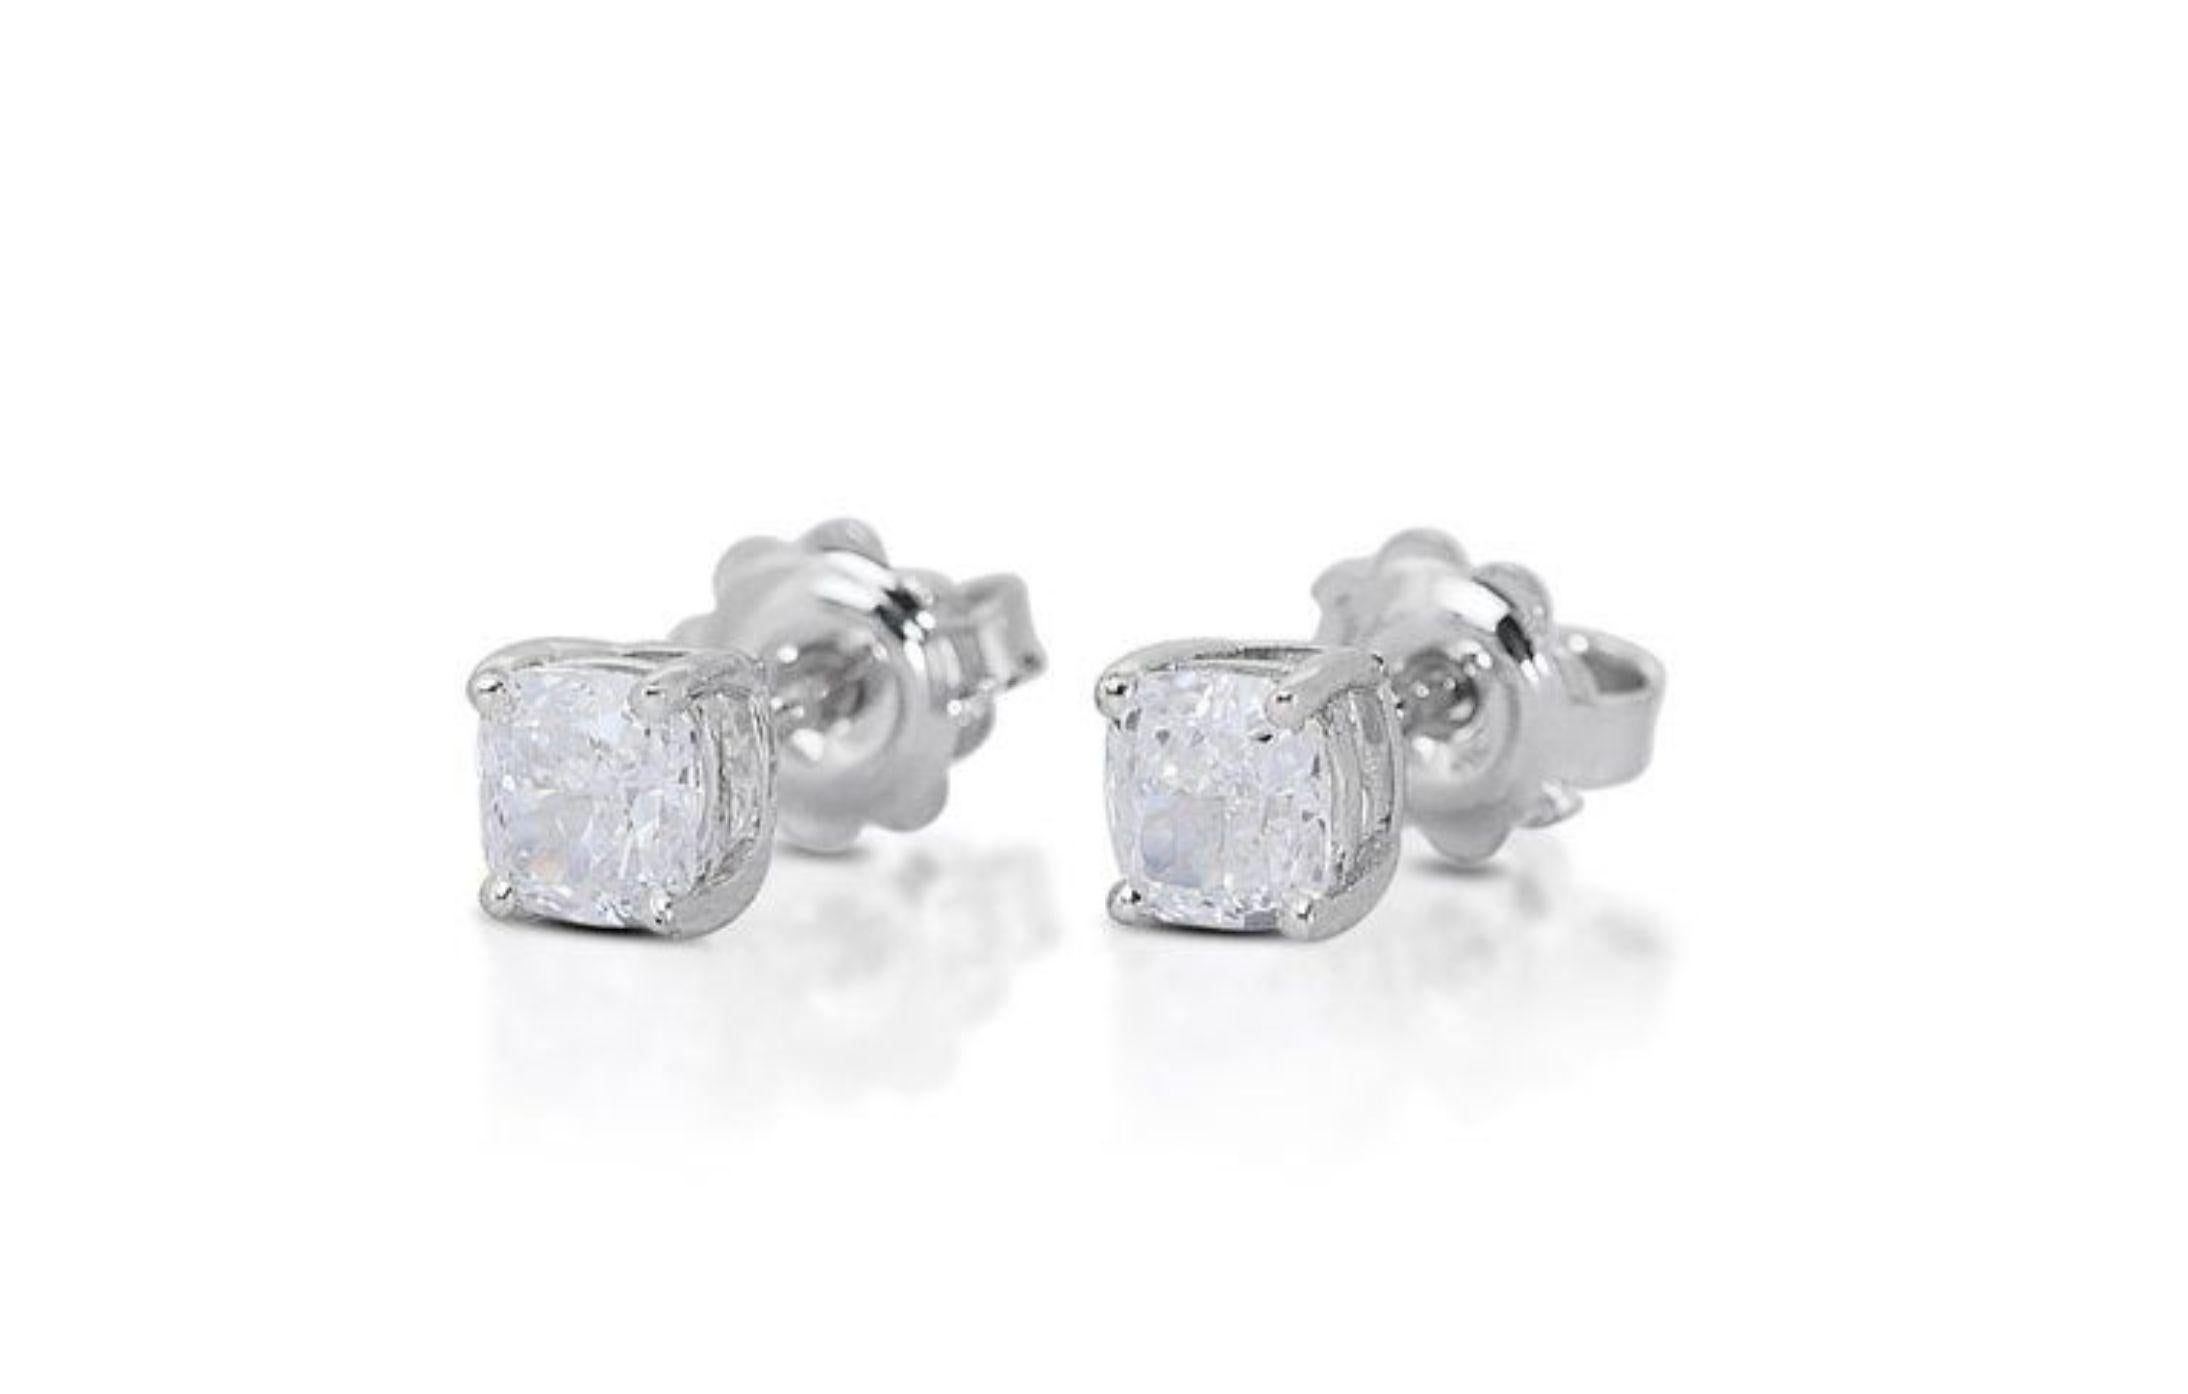 Stunning 1.40ct Cushion Modified Diamond Earrings set in 18K White Gold For Sale 3